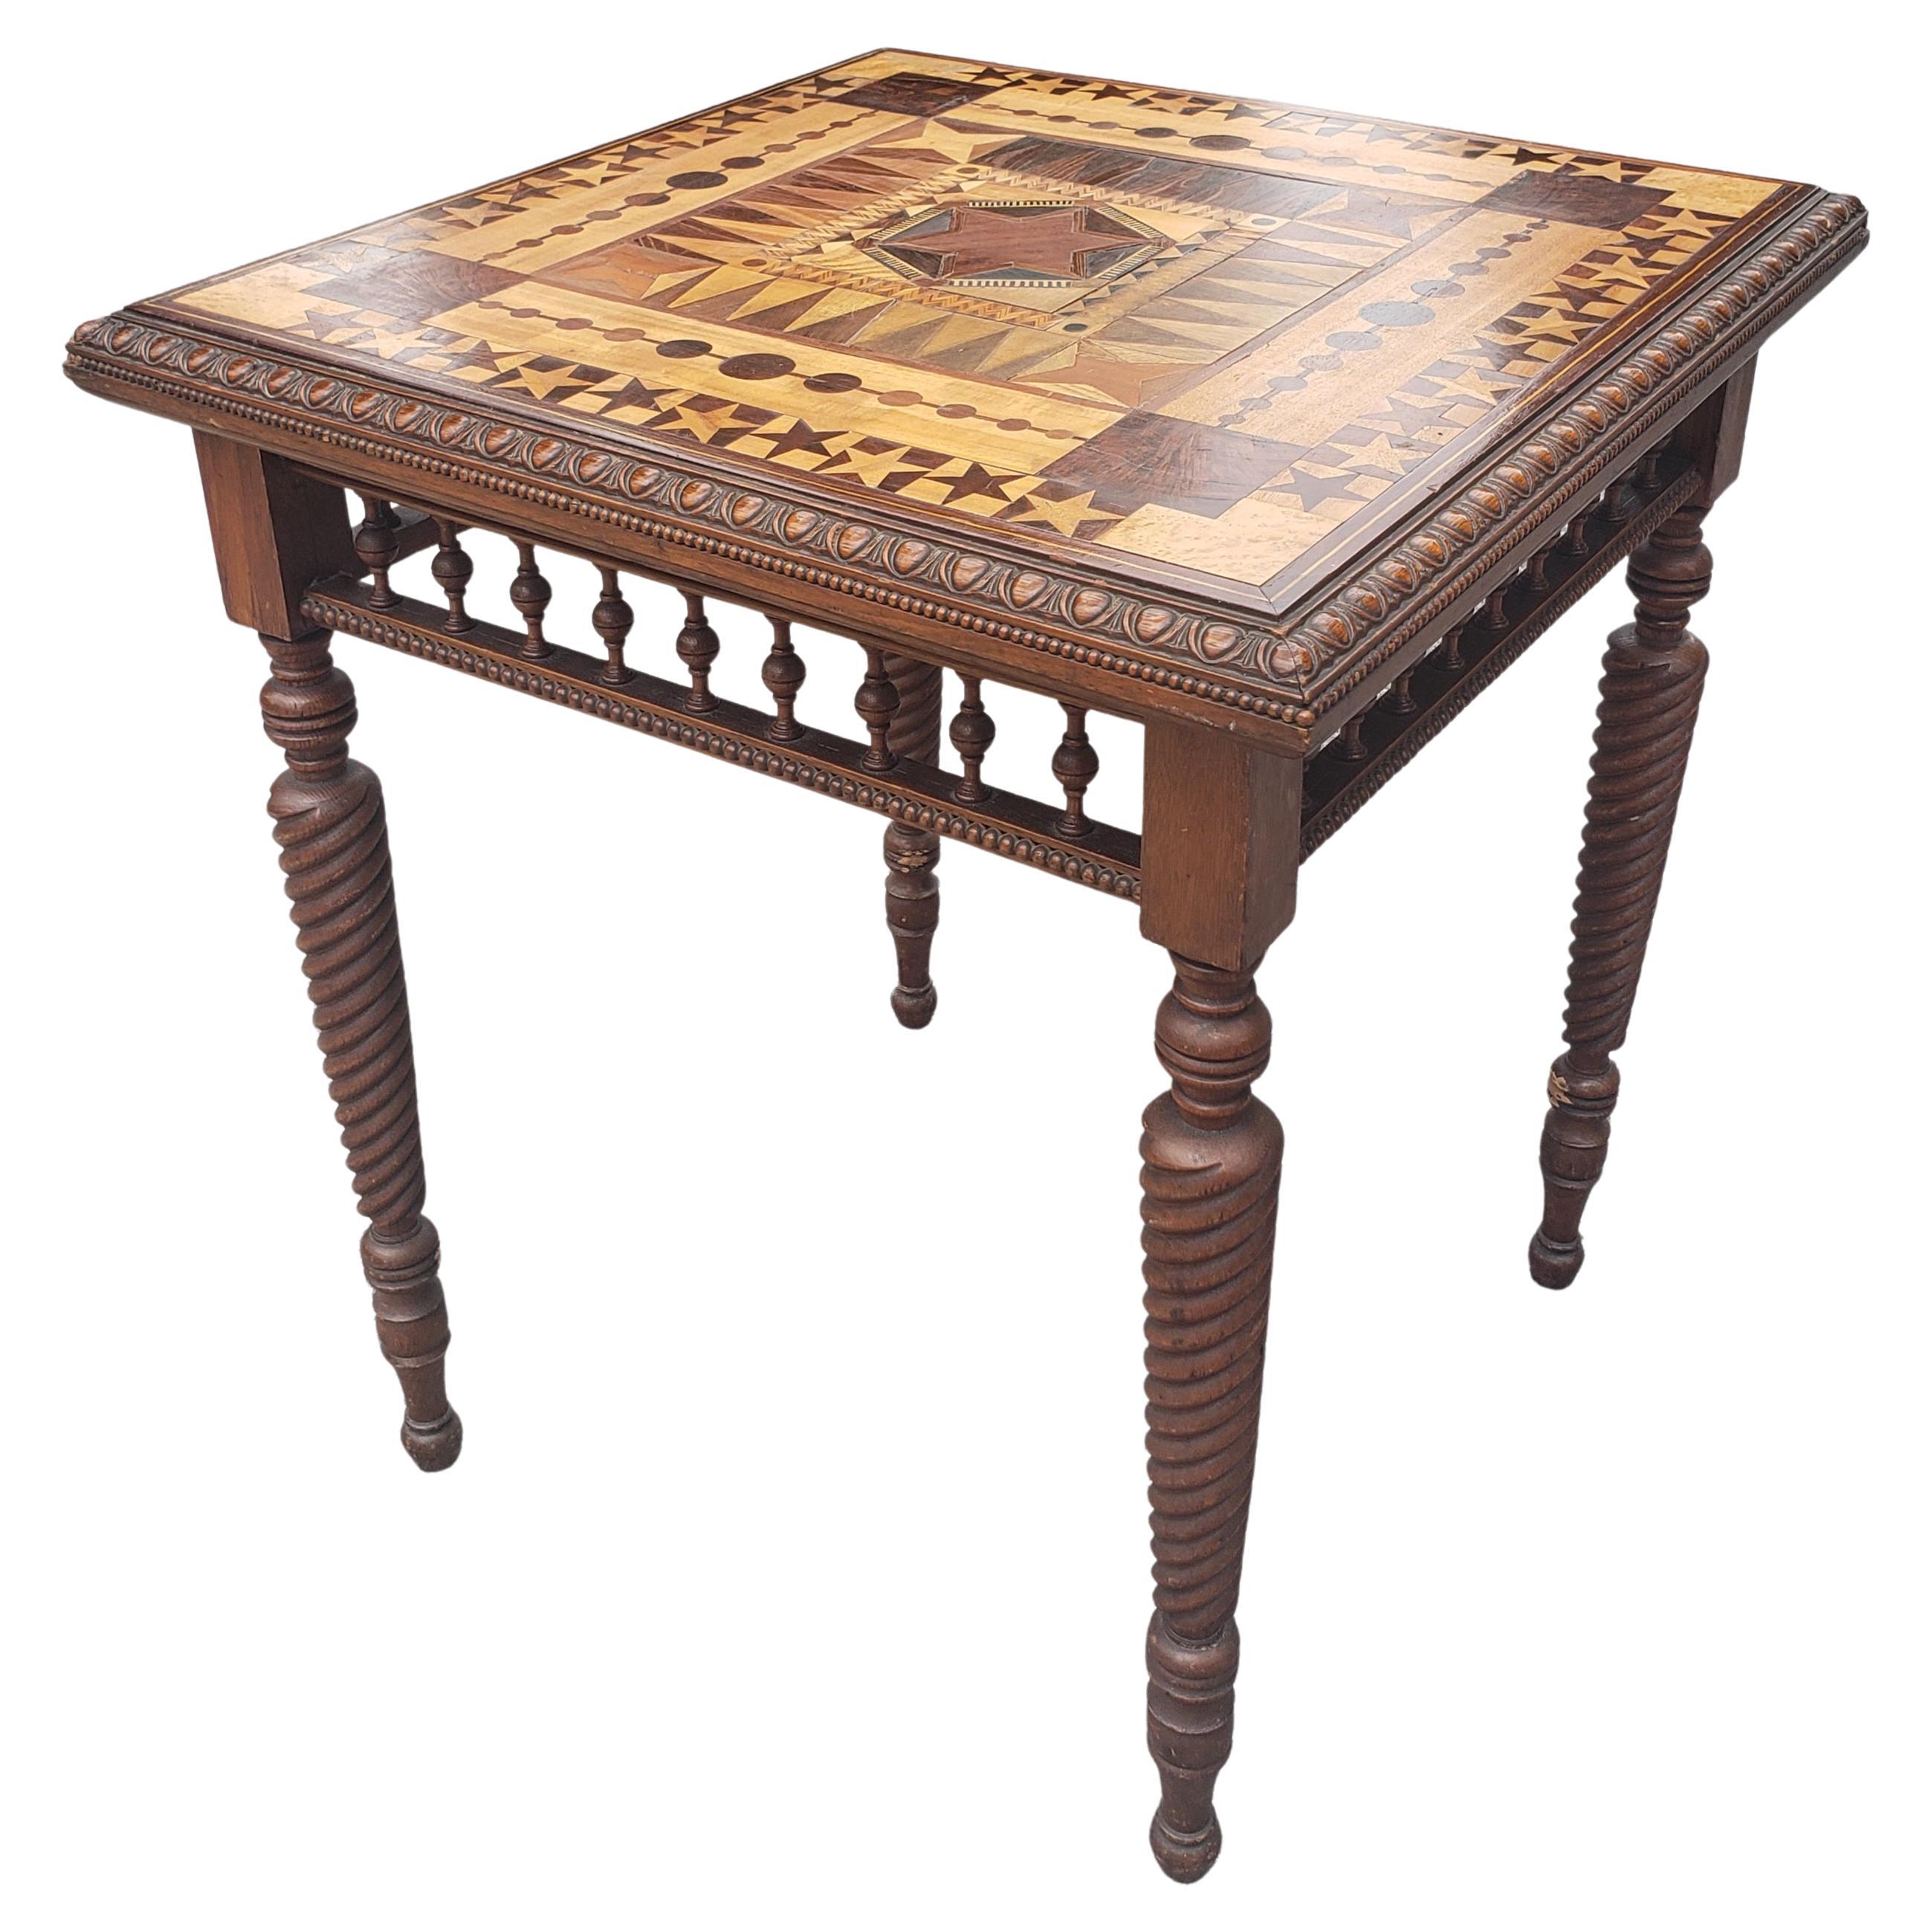 A stunning Late 19th C. Parquetry Mixed Woods and Turned Twisted Legs Card table, Tea Table. Amazing parquetry work out of fines wood species such as satinwood, walnut, burl mahogany, burl walnut, bird eye maple etc... Very Fine carvings on edges